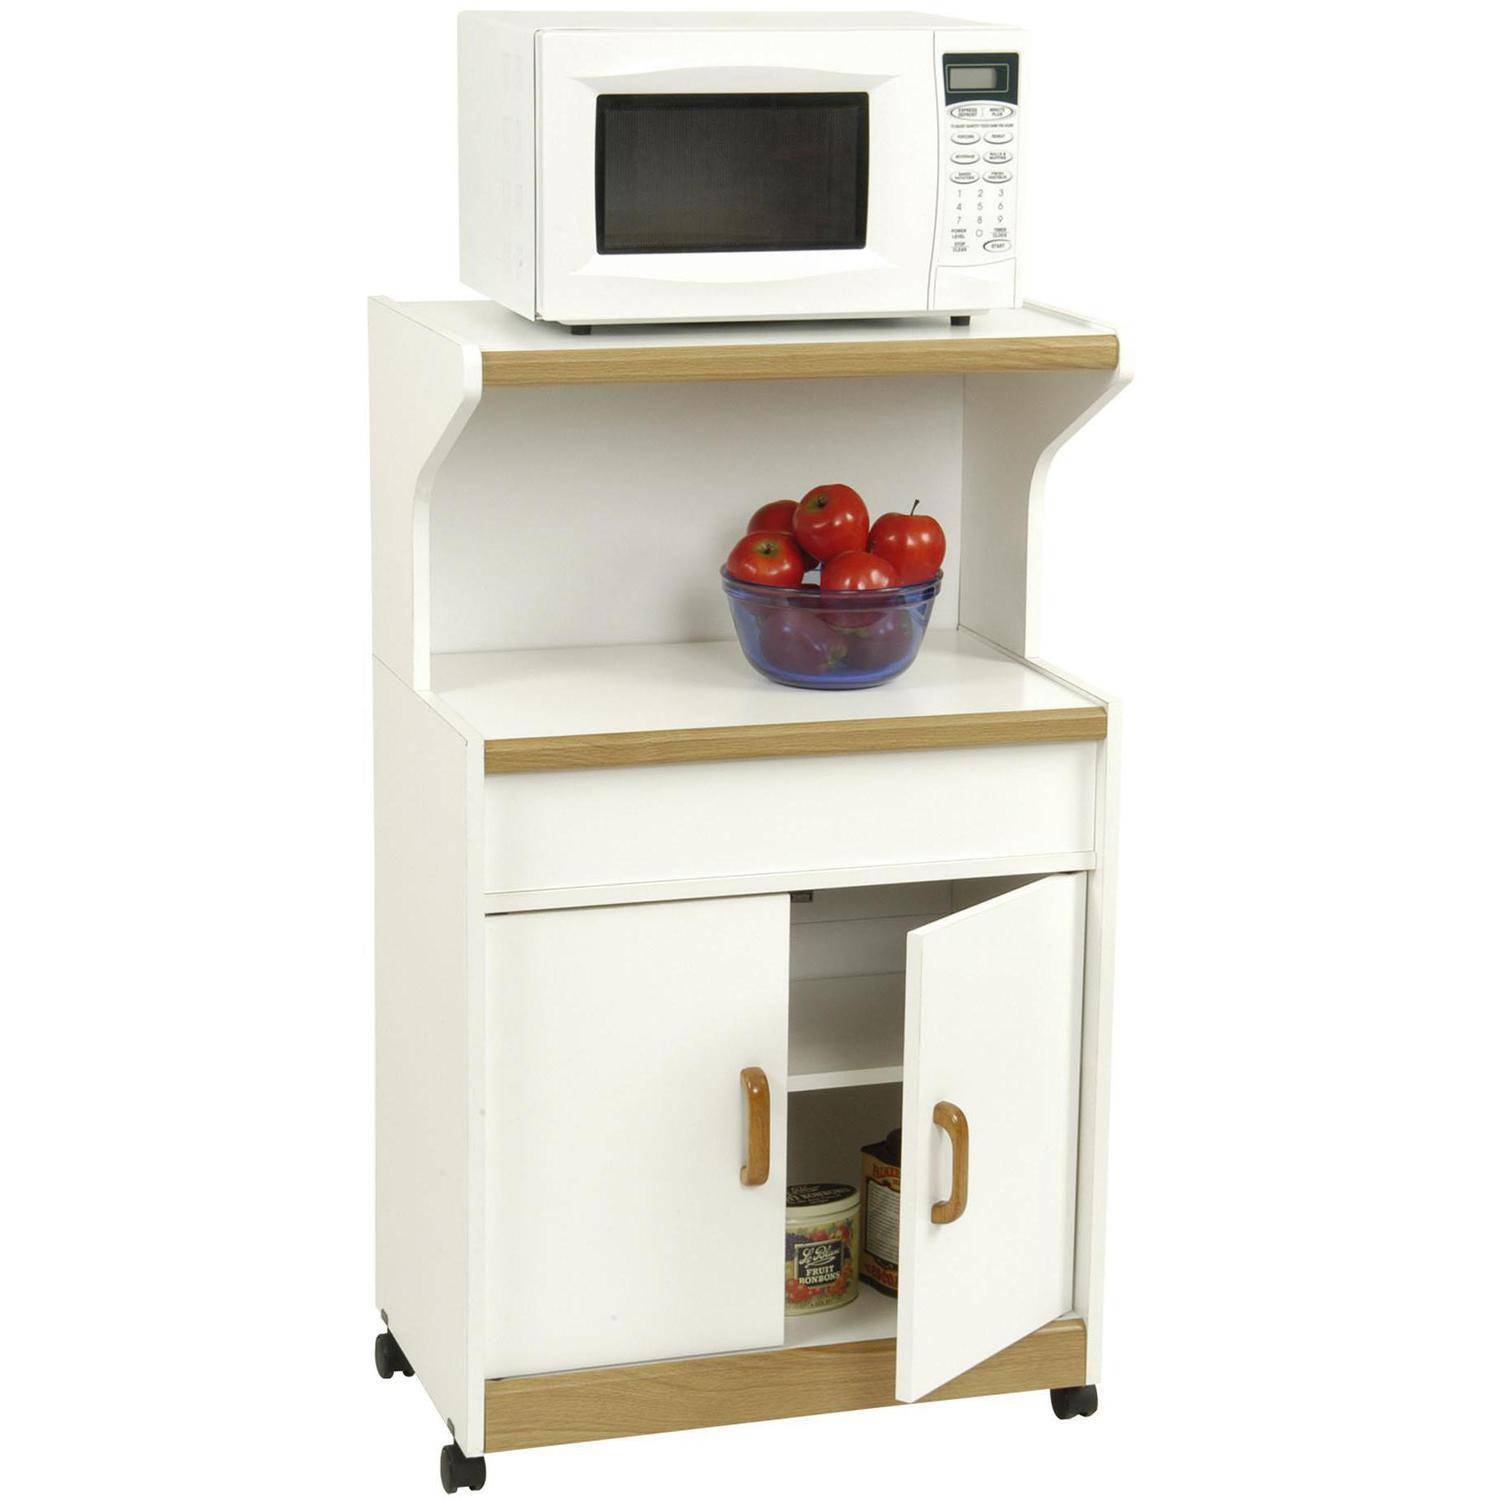 Kitchen cart for microwave and toaster oven